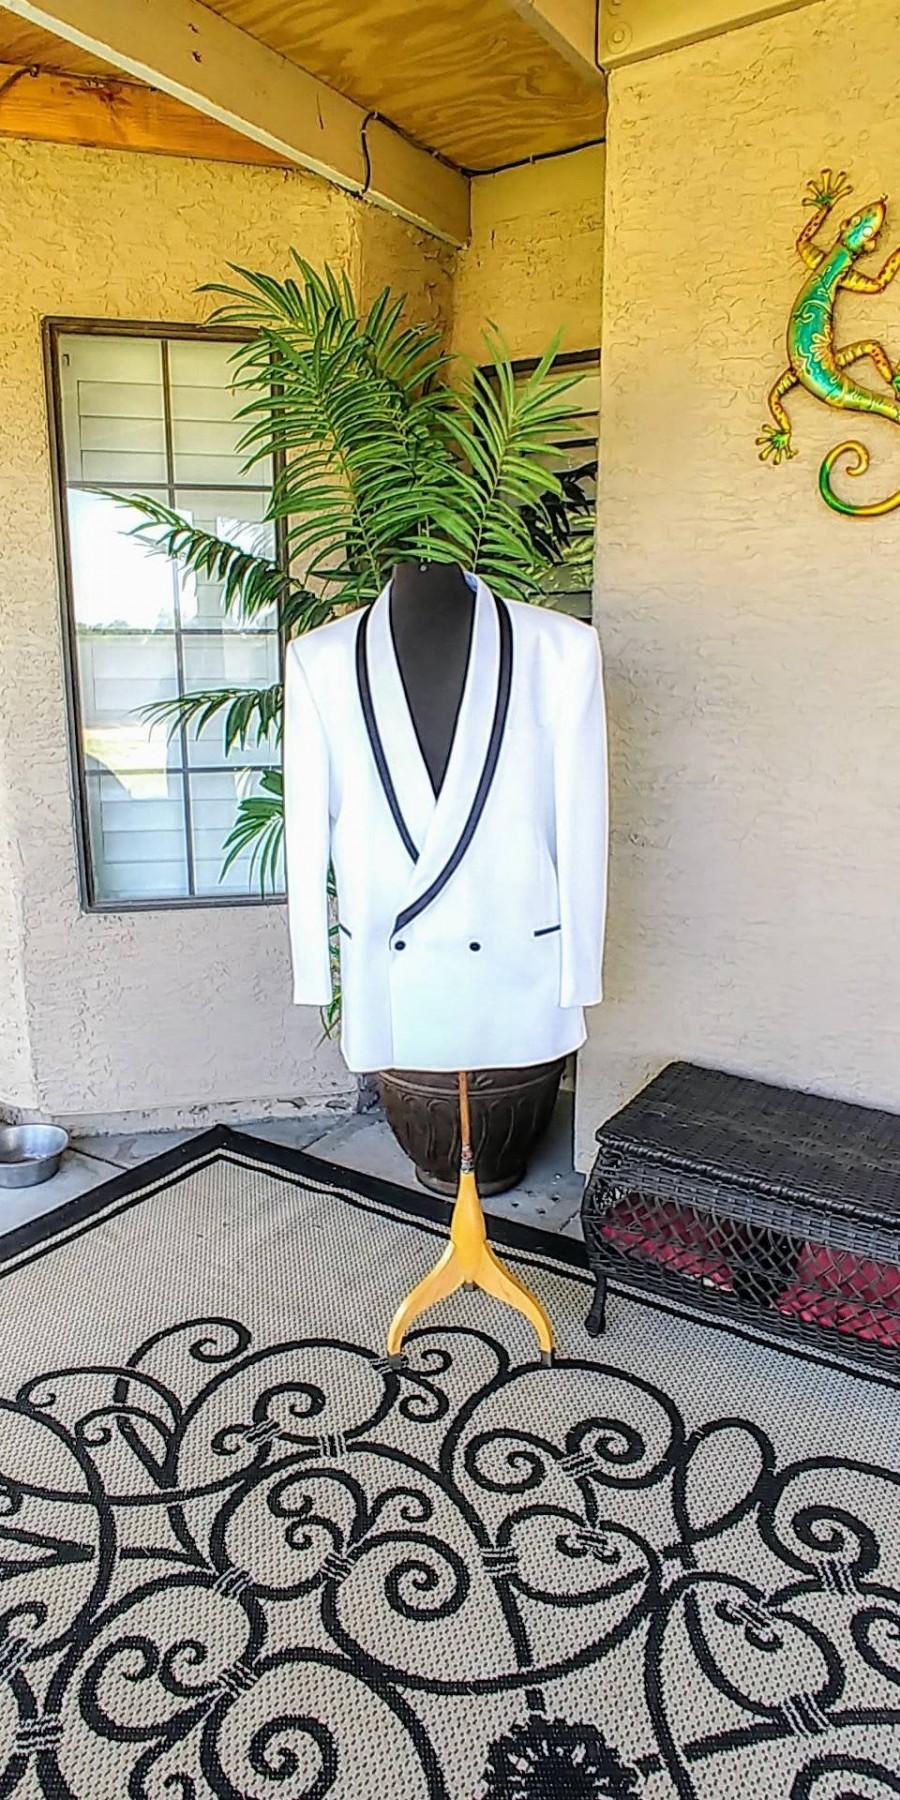 Wedding - Men's White Vintage Tuxedo Jacket. The Formal Wear Collection by Raffinati Made in U.S.A. Beautiful Jacket White with Black Trim. Size 50 L